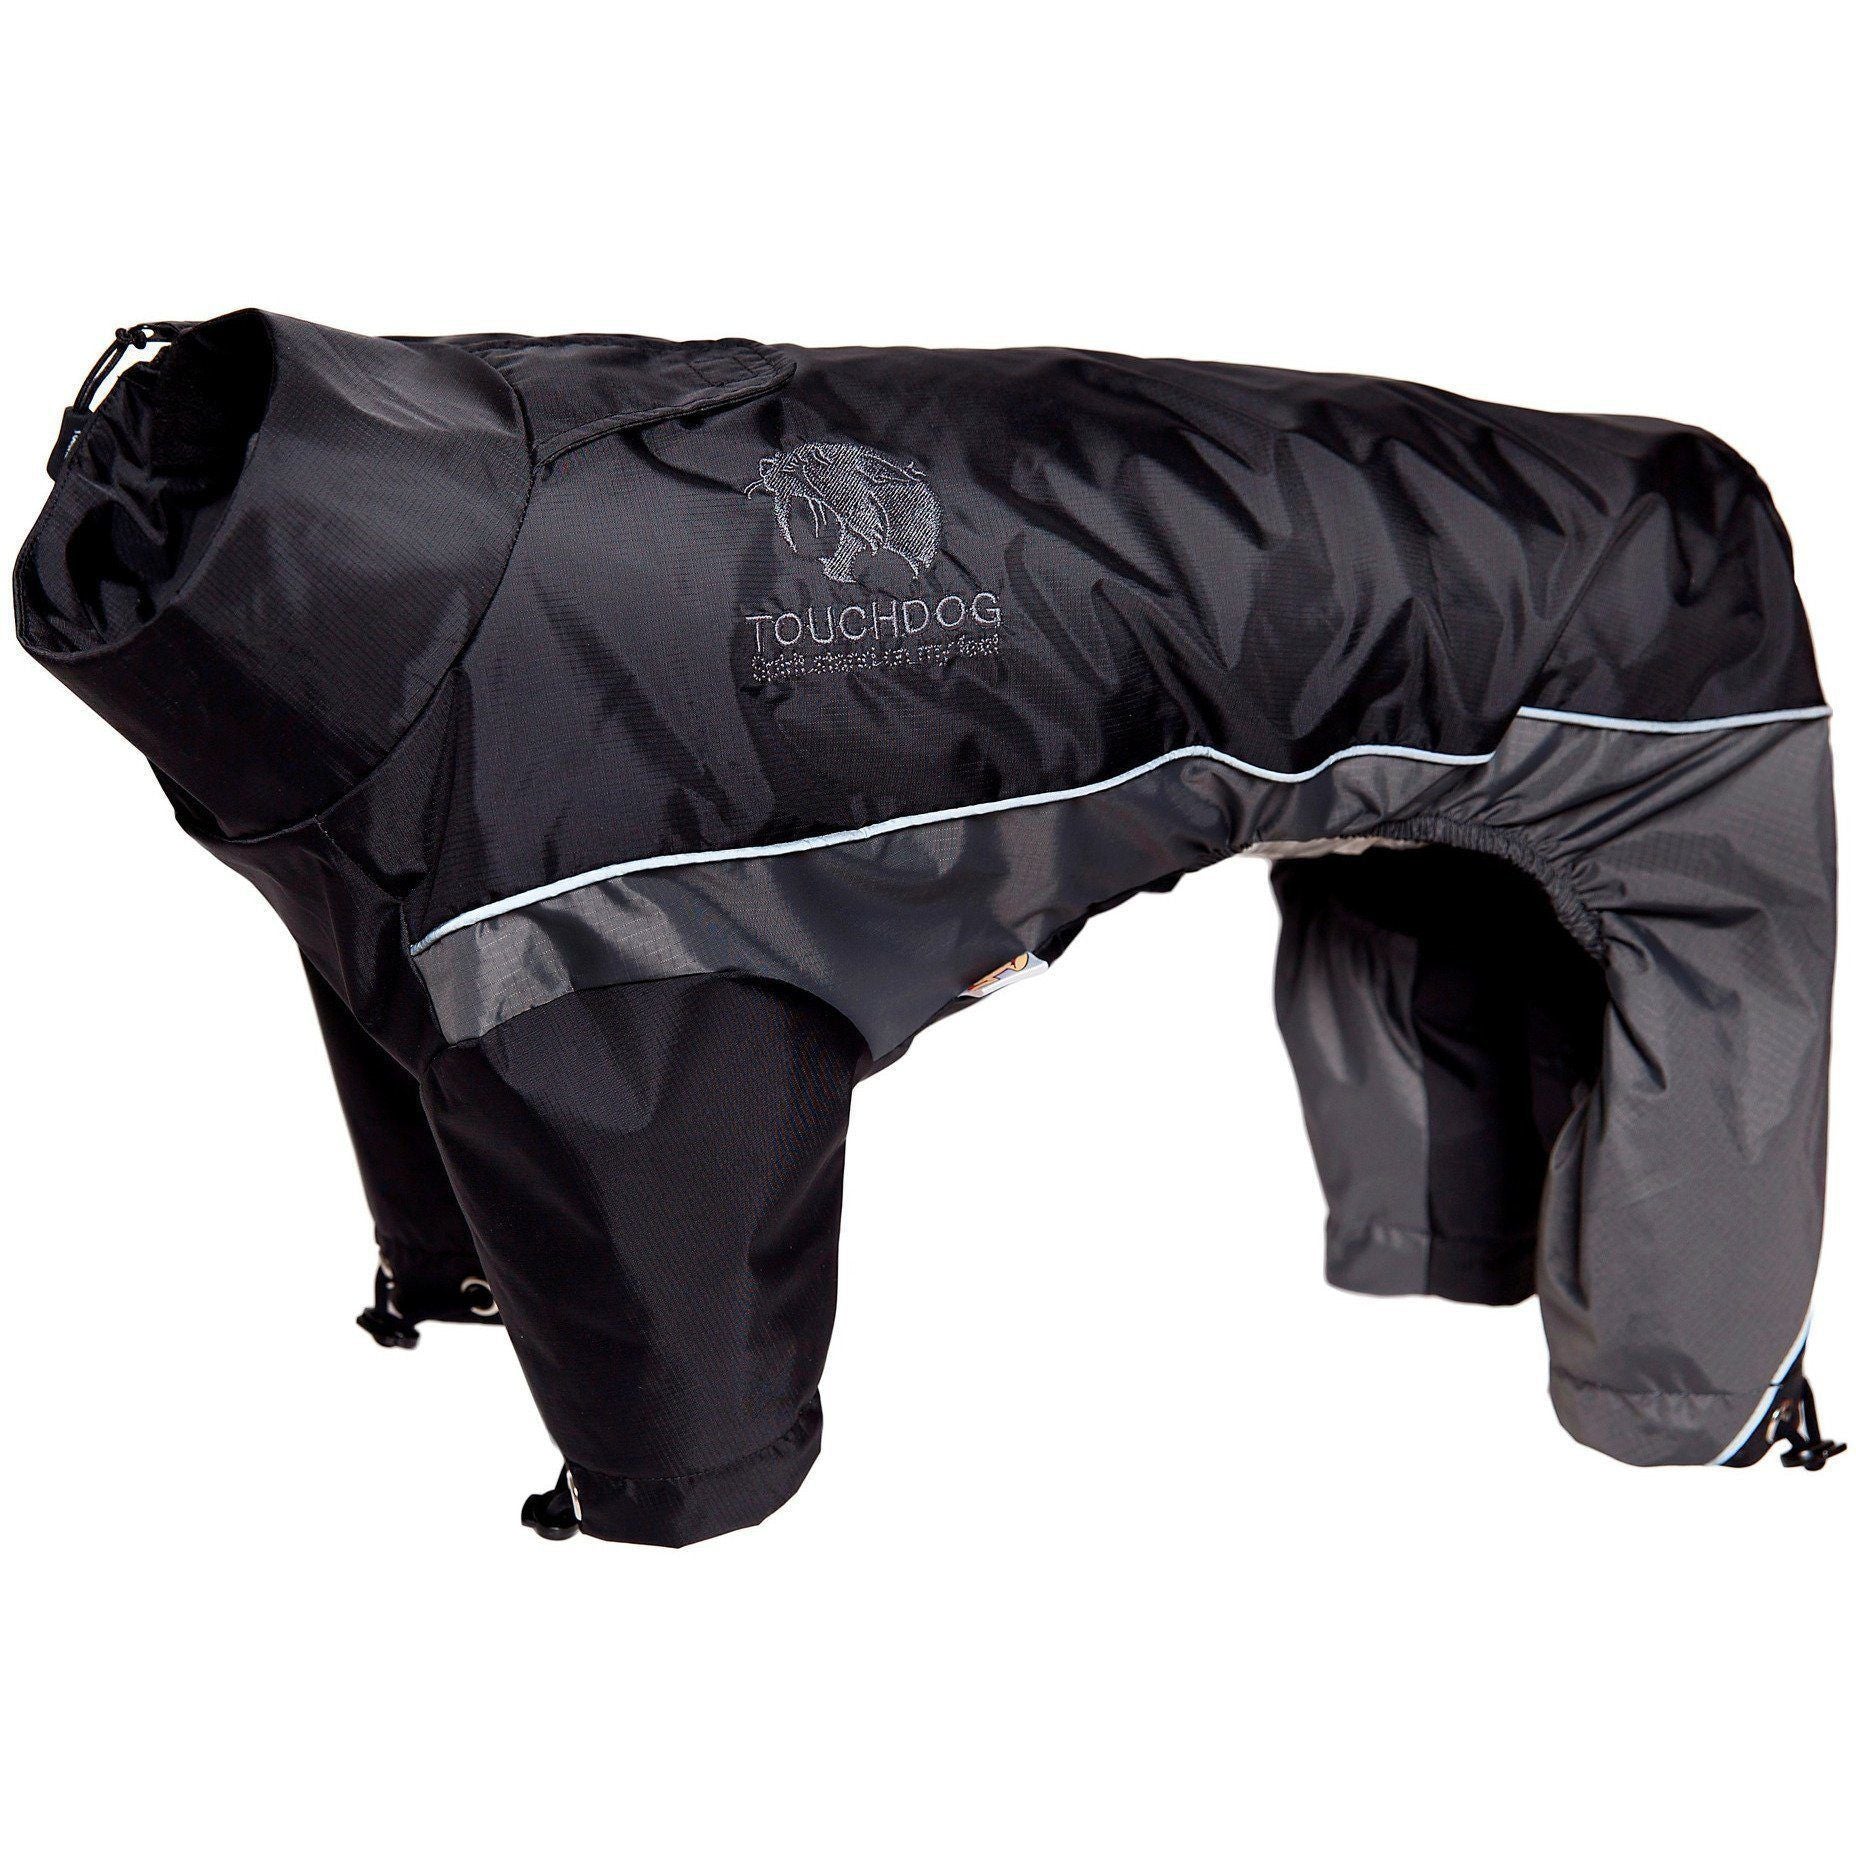 Touchdog ® Quantum-Ice Adjustable and Reflective Full-Body Winter Dog Jacket X-Small Black, Grey